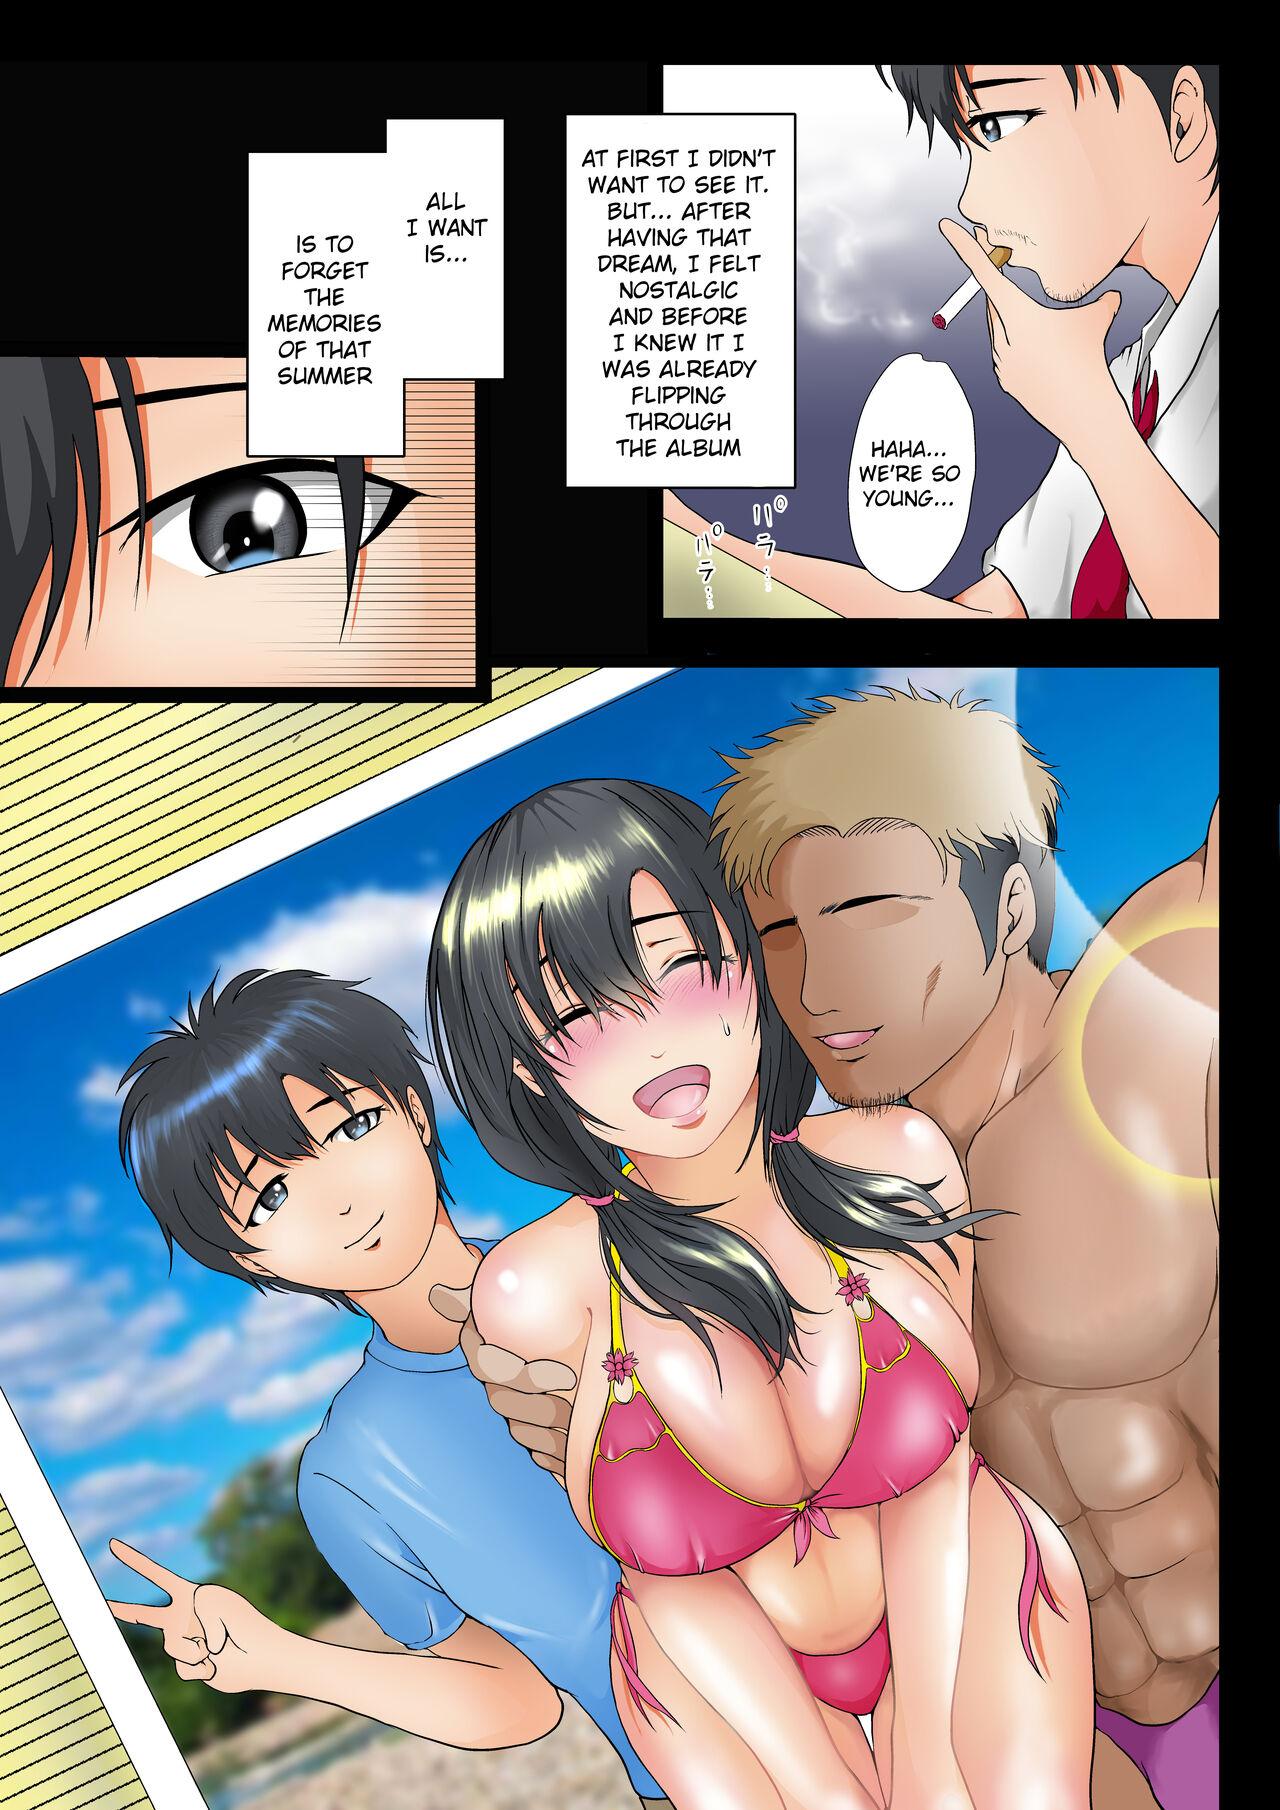 Gangbang The reason why the bond with my childhood friend is broken so easily - Original Young Men - Page 6